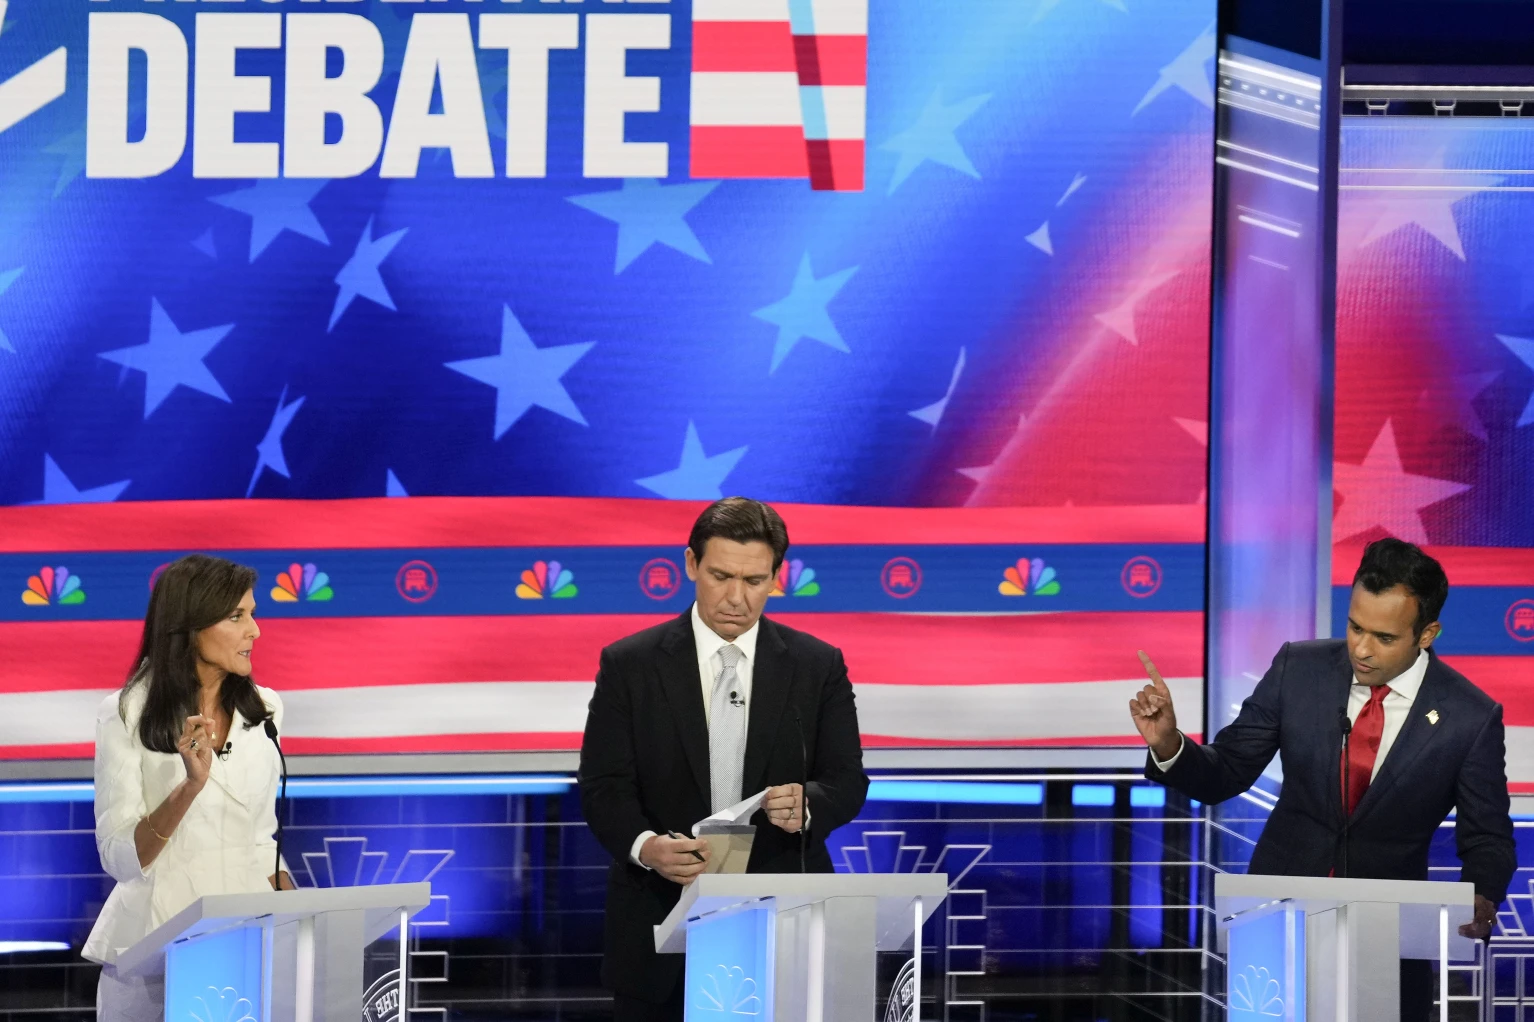 GOP candidates tough it out in third debate, but Trump remains favourite for party ticket